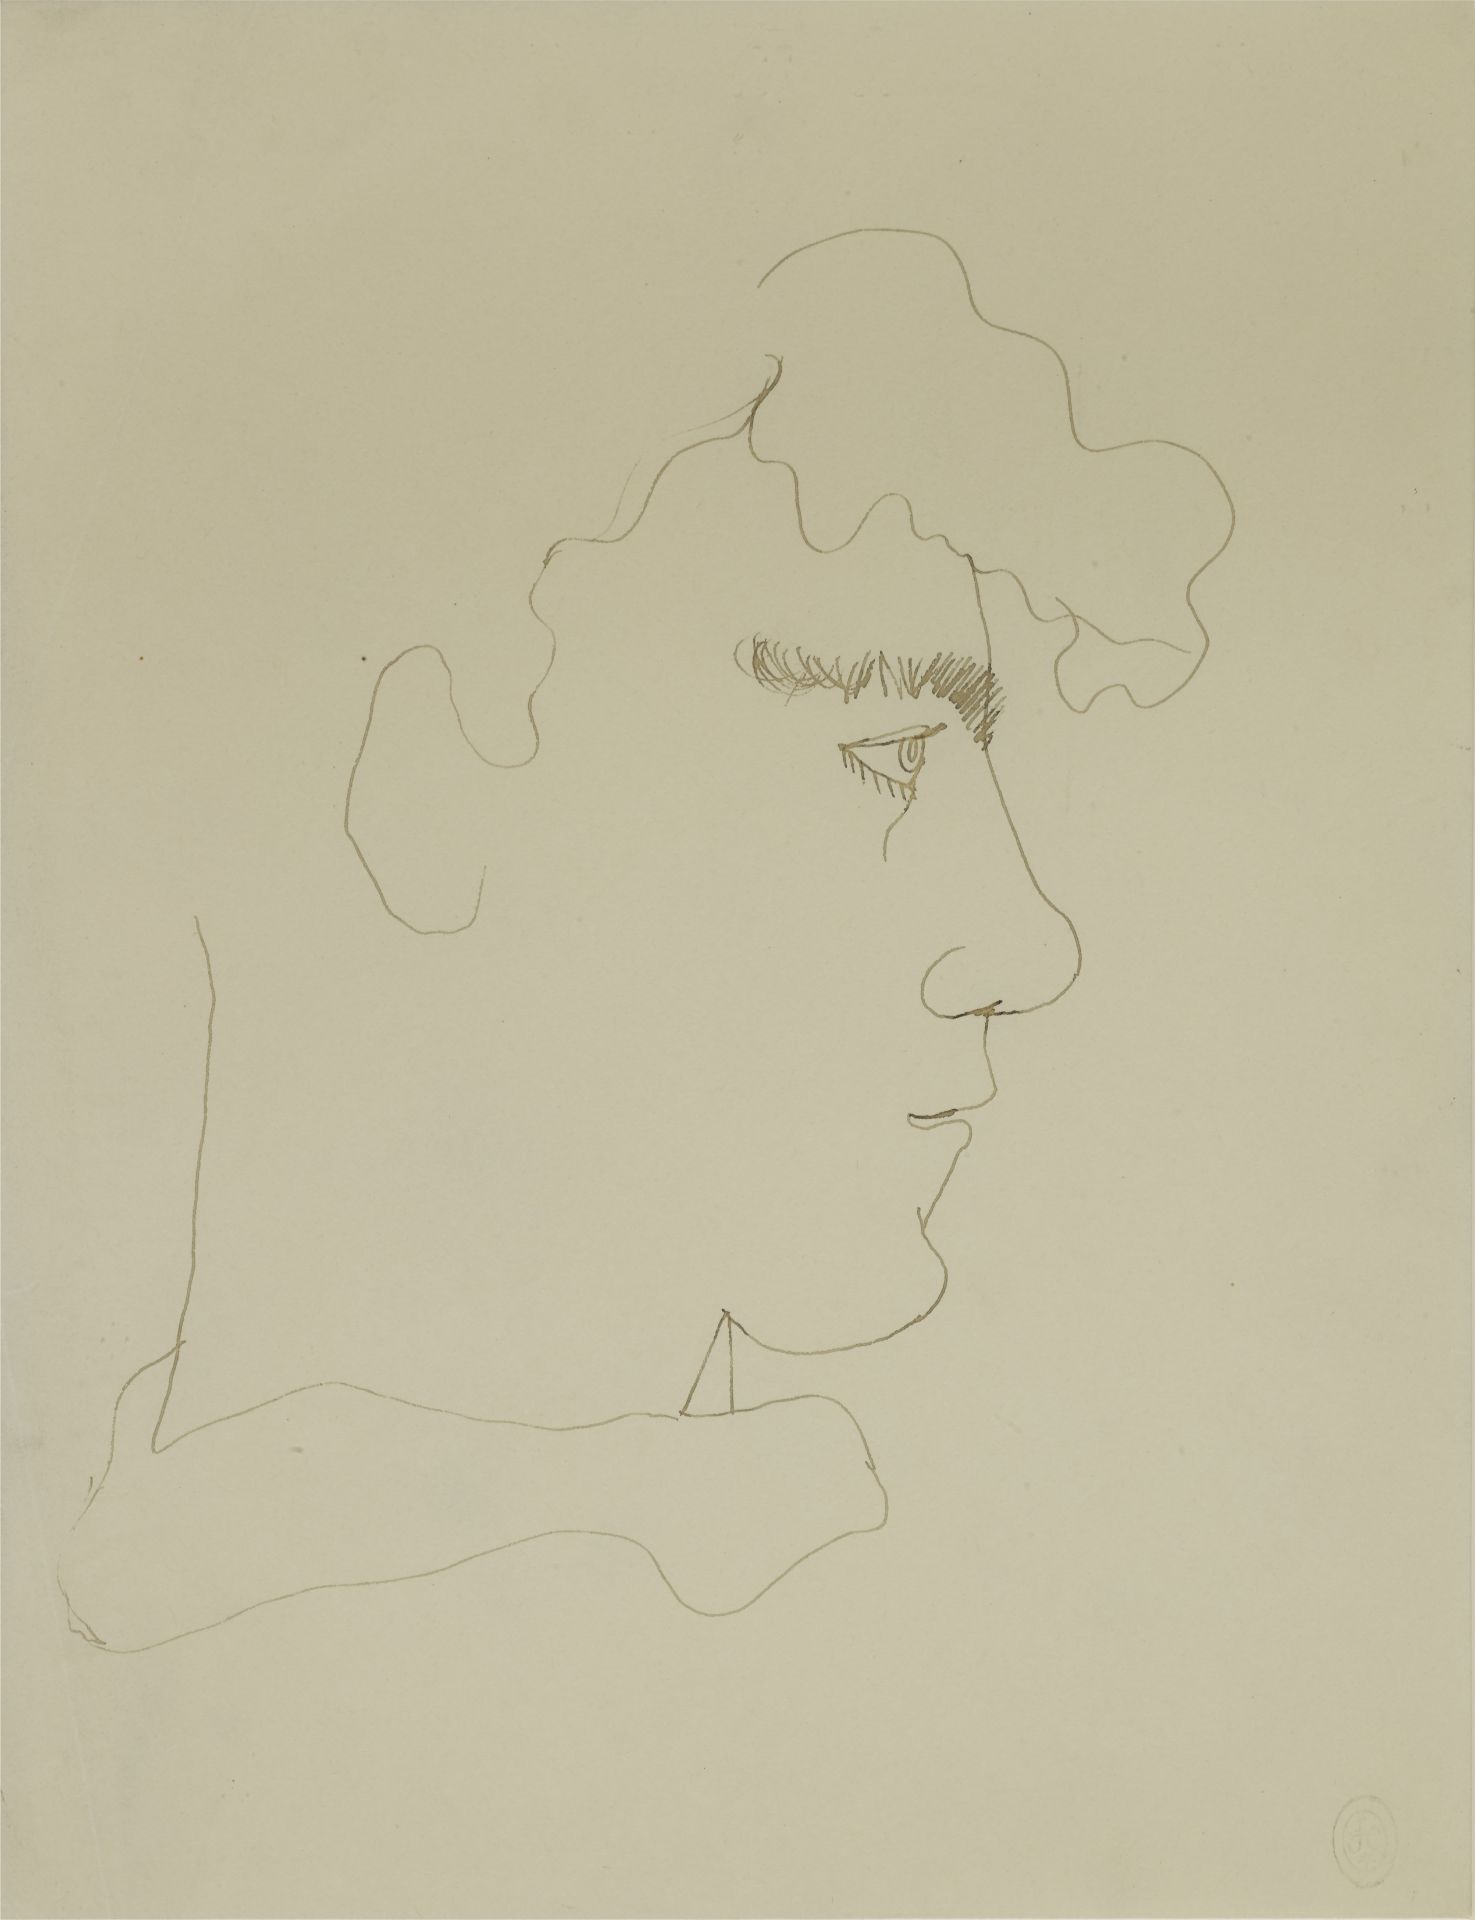 JEAN COCTEAU (1889-1963) Portrait d'Yvon Belaval ( with the atelier stamp India ink on paper)